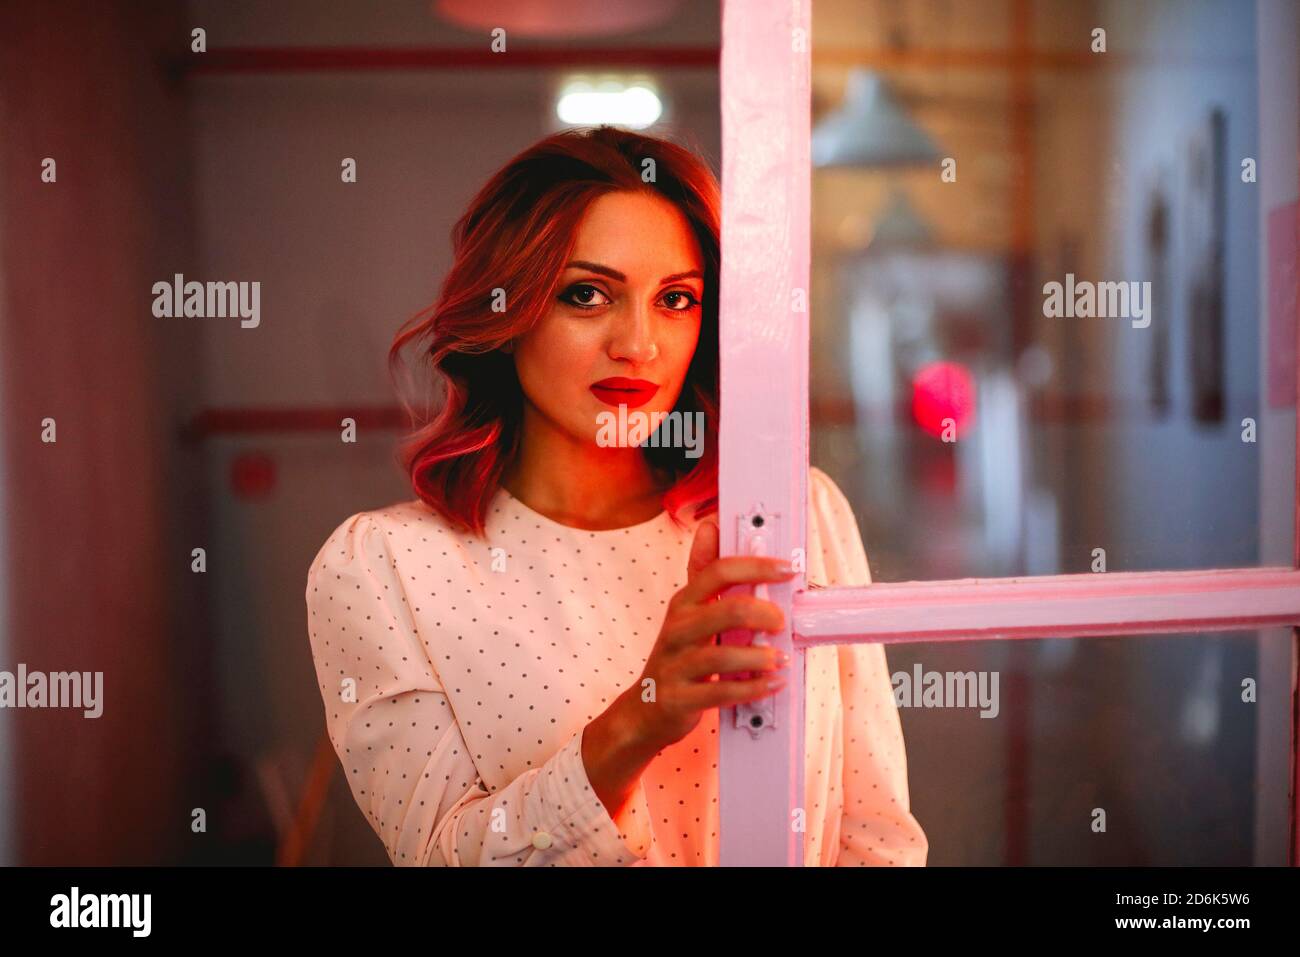 Charming female with wavy hair standing near door in room illuminated by red light and looking at camera Stock Photo